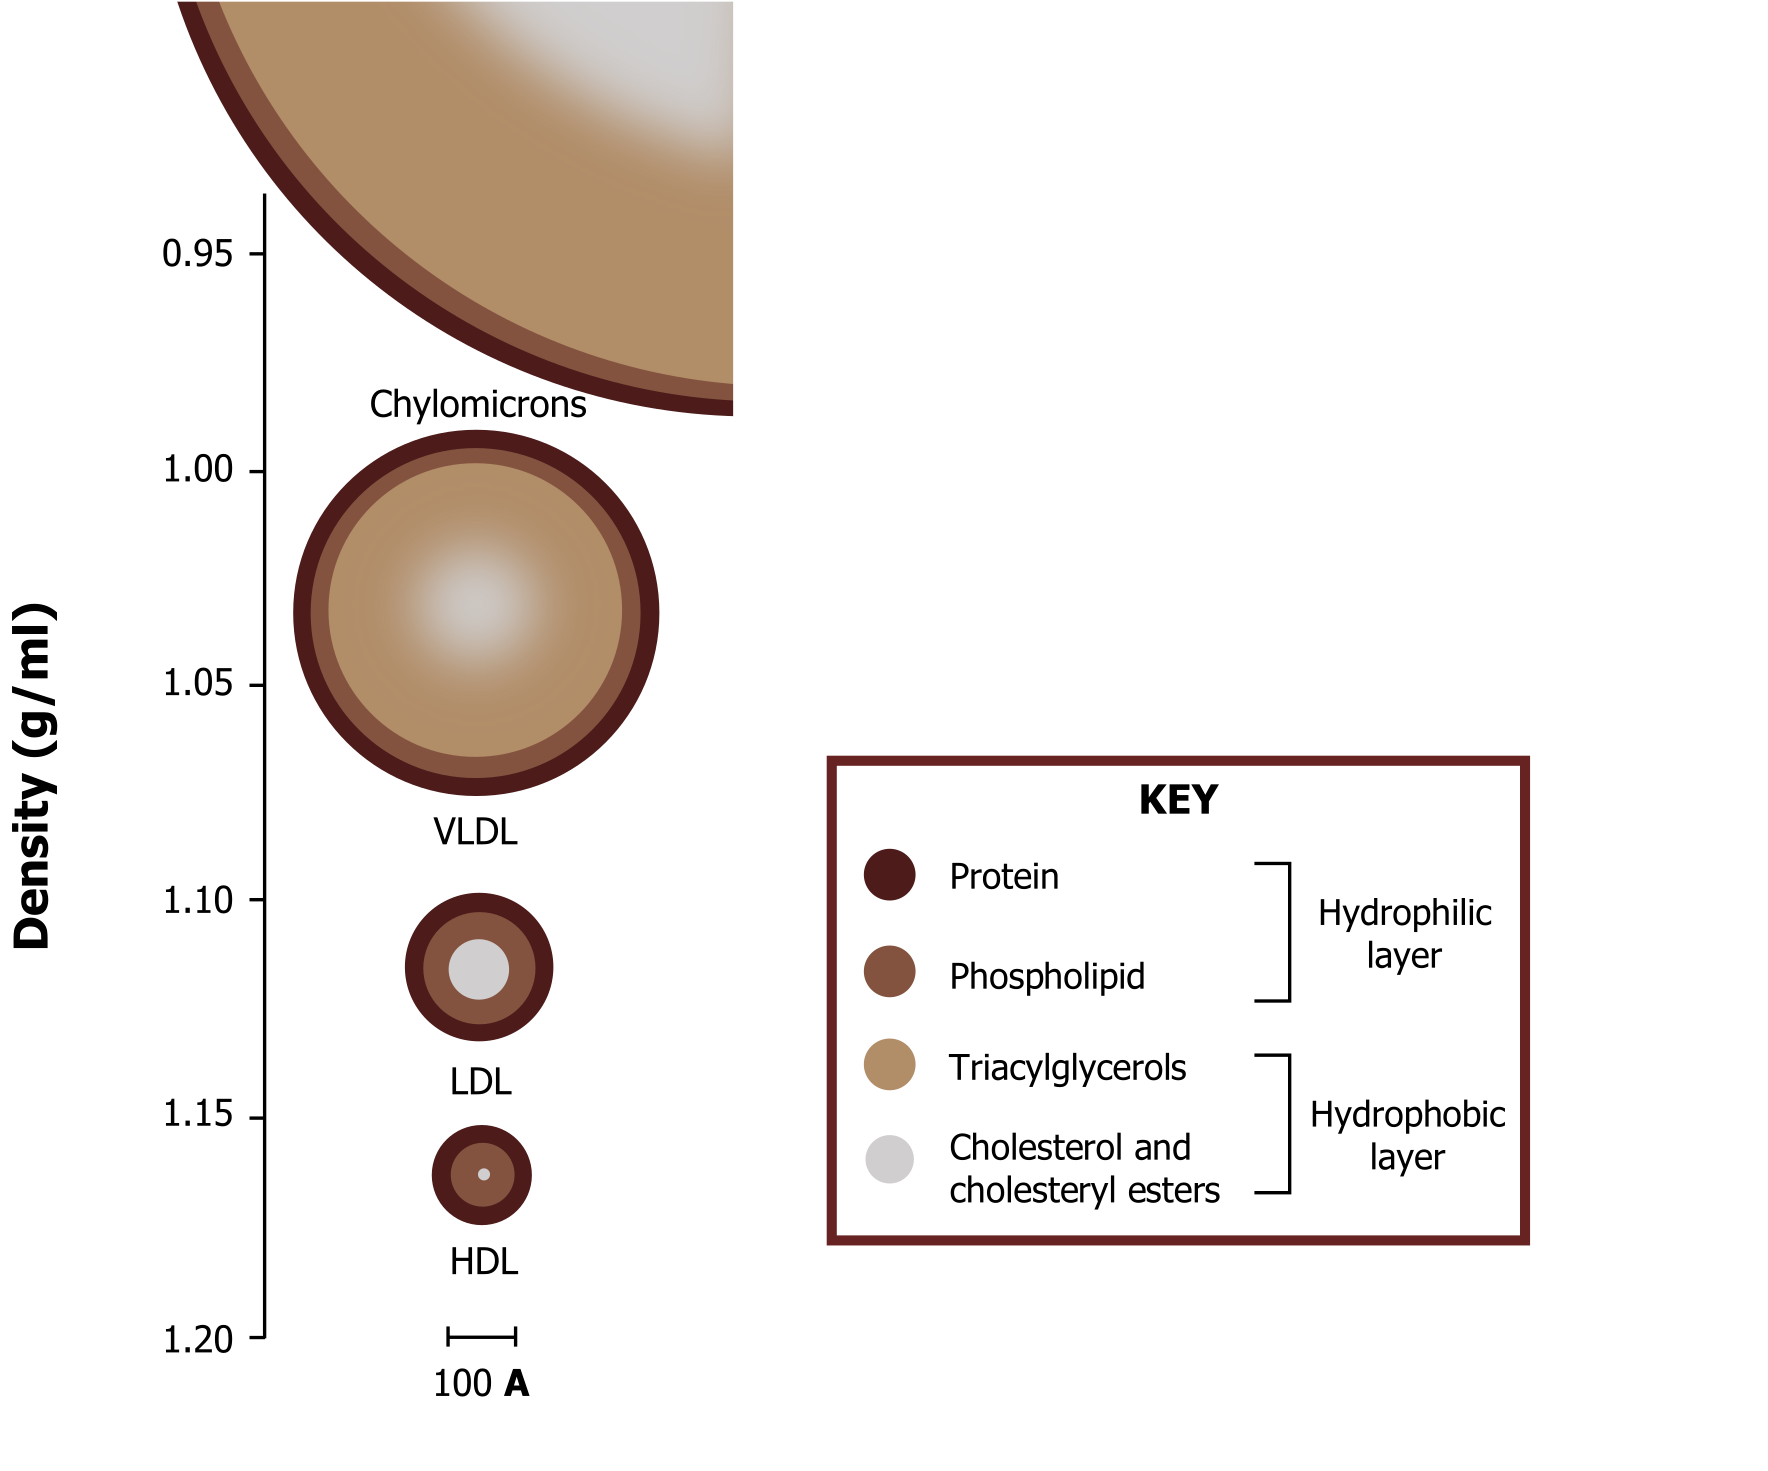 Key: Four circles with three shades of brown and one Grey. The Hydrophilic layer is dark-protein and middle-phospholipid. The hydrophobic layer is light-triacylglycerols and Grey-cholesterol and cholesteryl esters. Graph: Vertical axis labeled density (g/mL) from 1.20 at the bottom to 0.95 at the top. From bottom to top there are 4 circles increasing in size and colors in rings listed from the outermost edge in. HDL with dark, middle, and light. LDL with dark, middle, and Grey. VLDL with dark, middle, large light, and Grey center. Chylomicrons with dark, middle, large light, and Grey center.